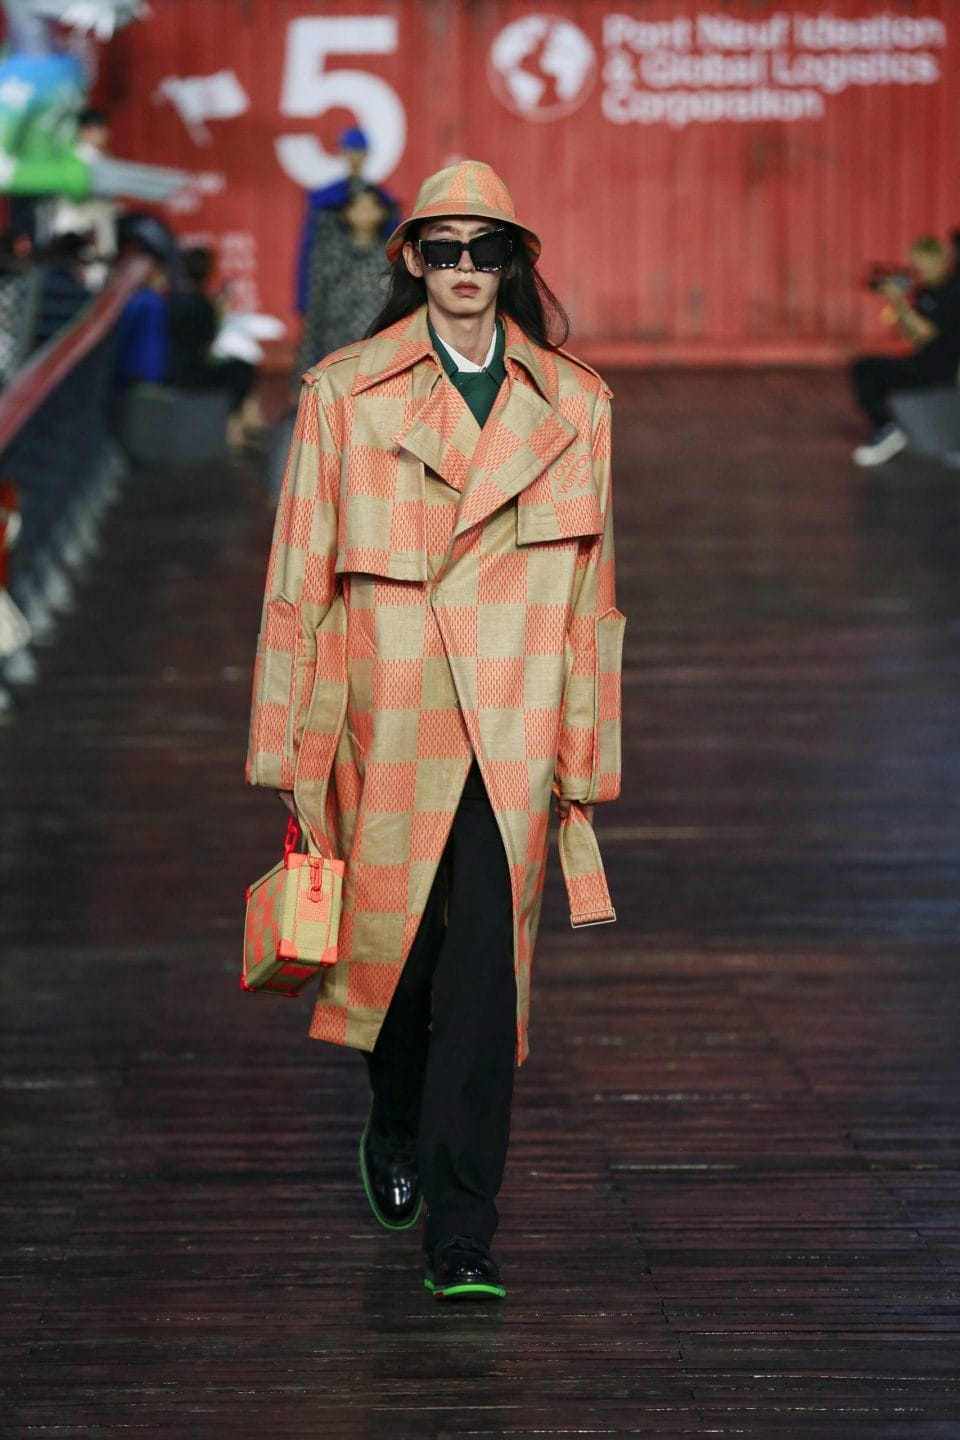 Louis Vuitton's Spring 2021 Collection Looks To Gen Z For Inspiration